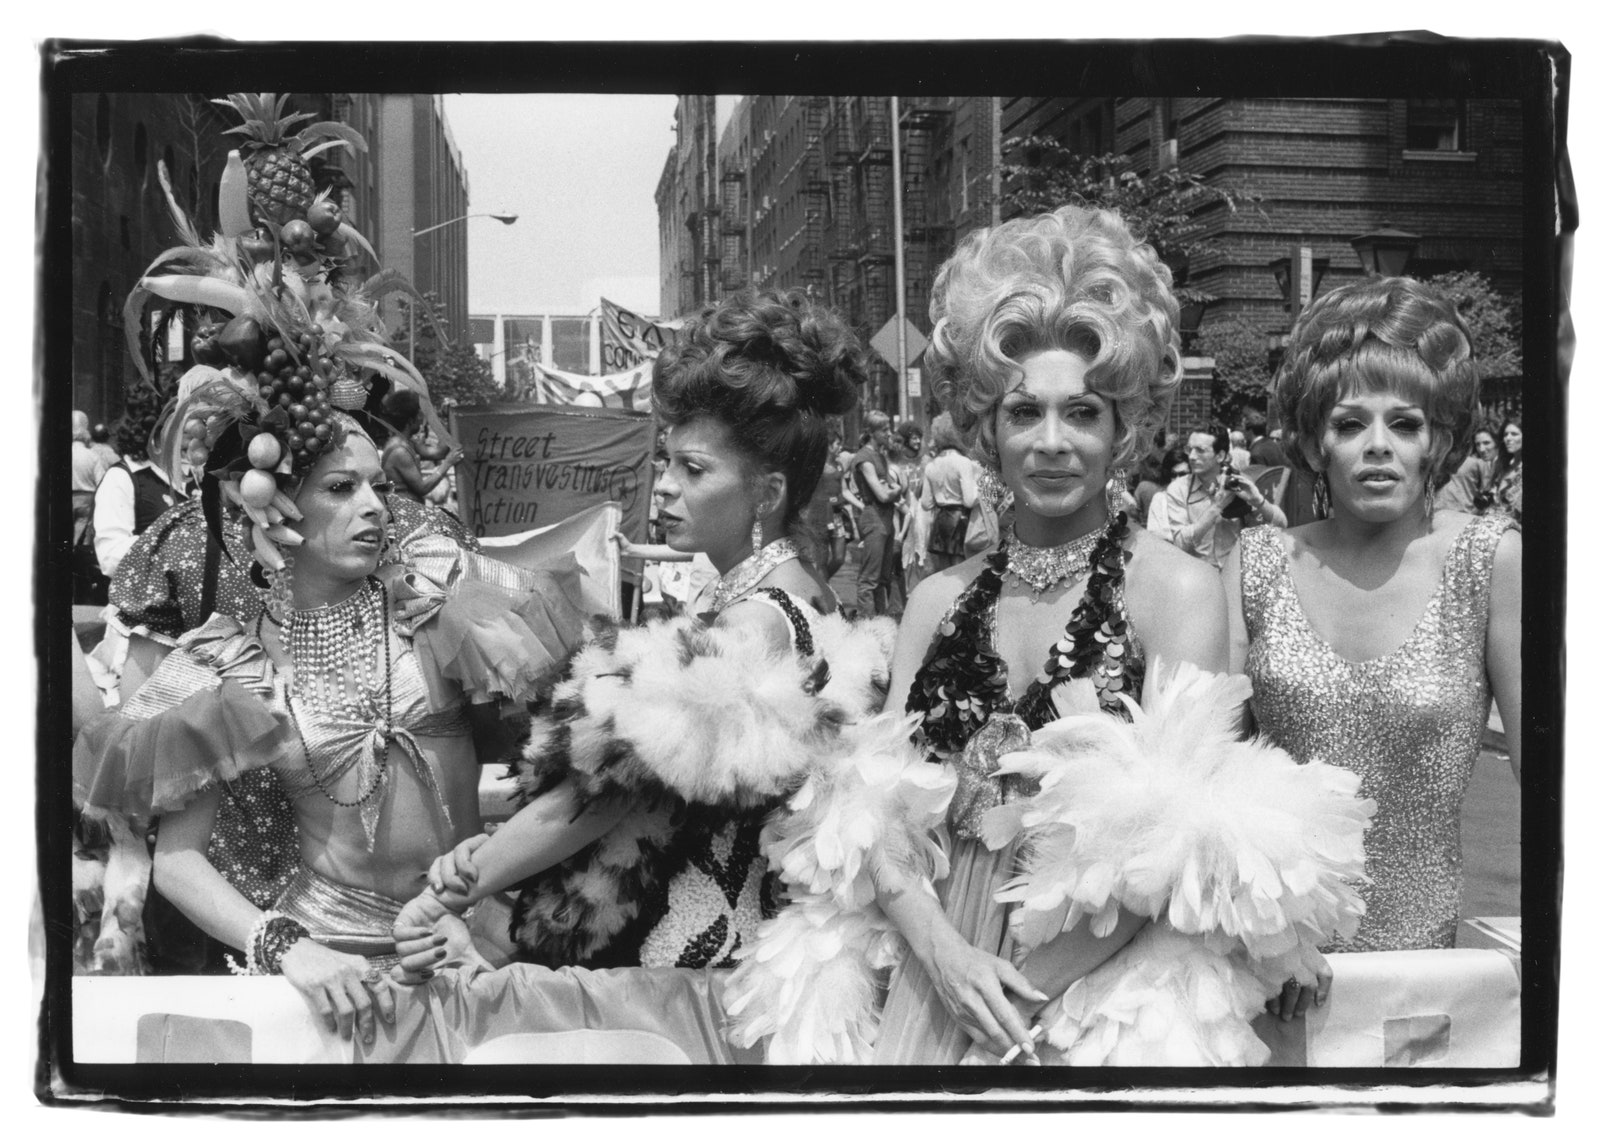 Black and white photograph of four drag queens in the middle of the street. Two face each other while the others look forward beyond the camera frame